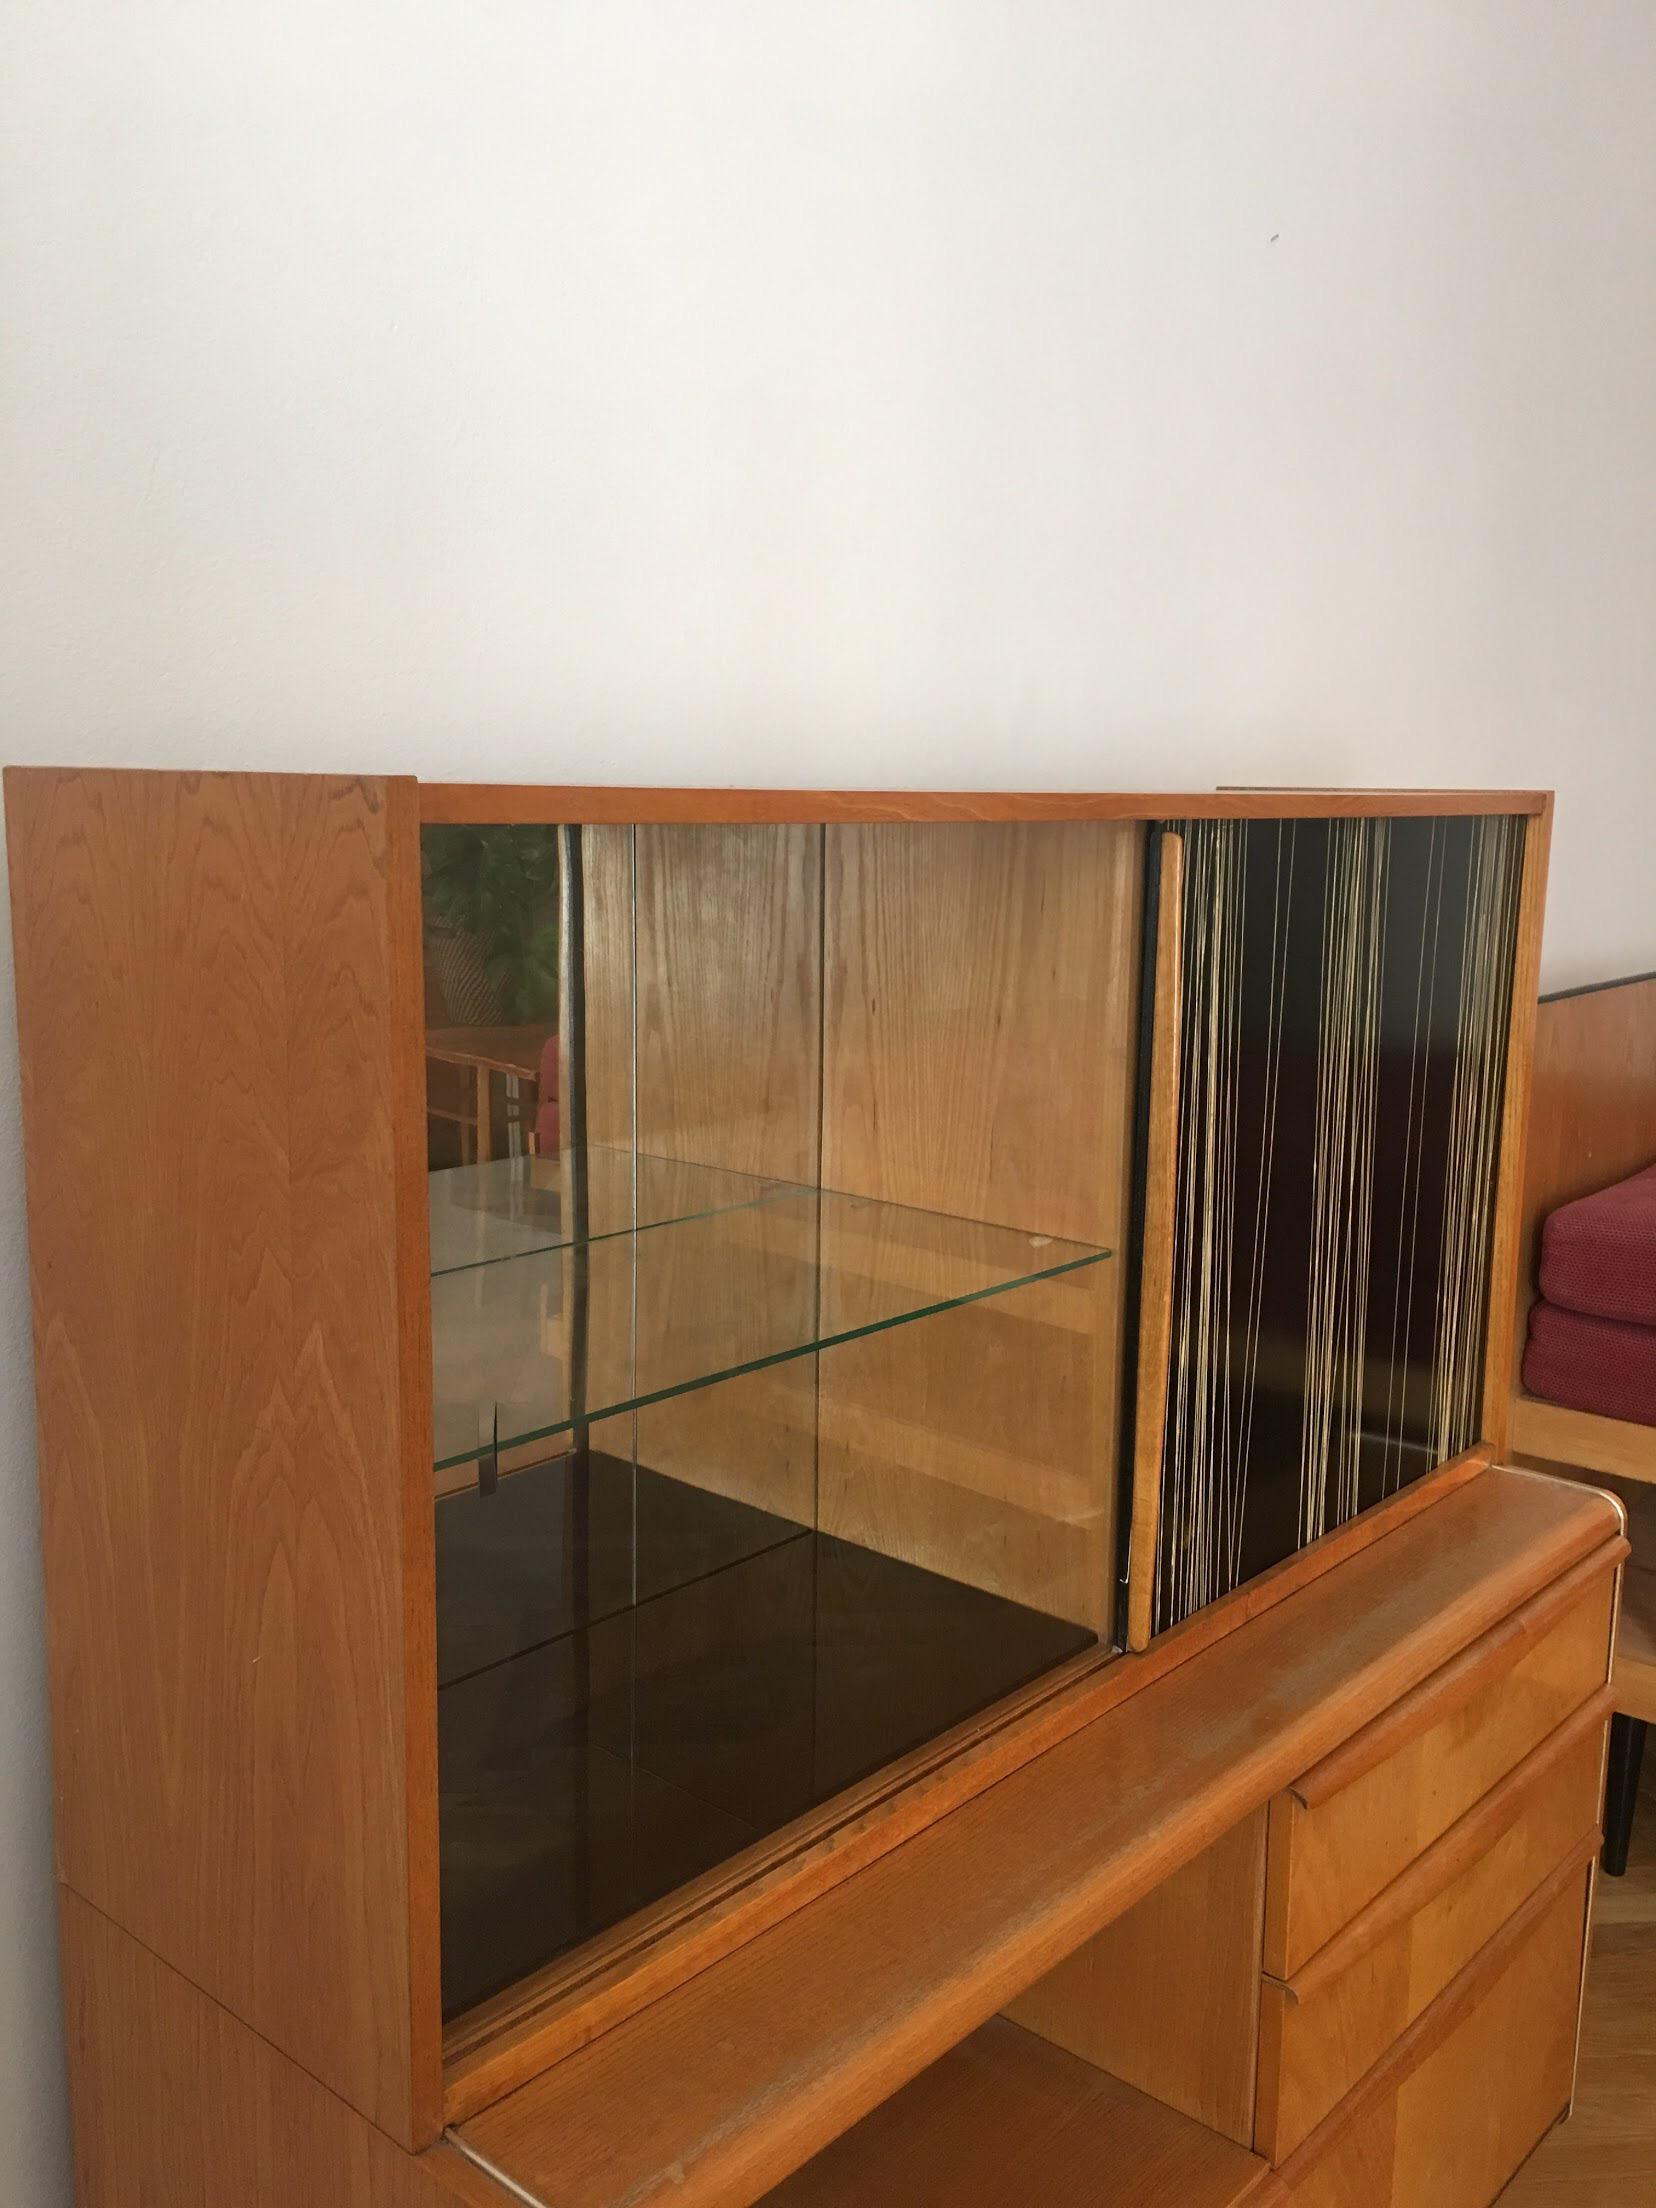 Mid-Century Modern Wooden Sideboard with Bar from Jitona, 1960s For Sale